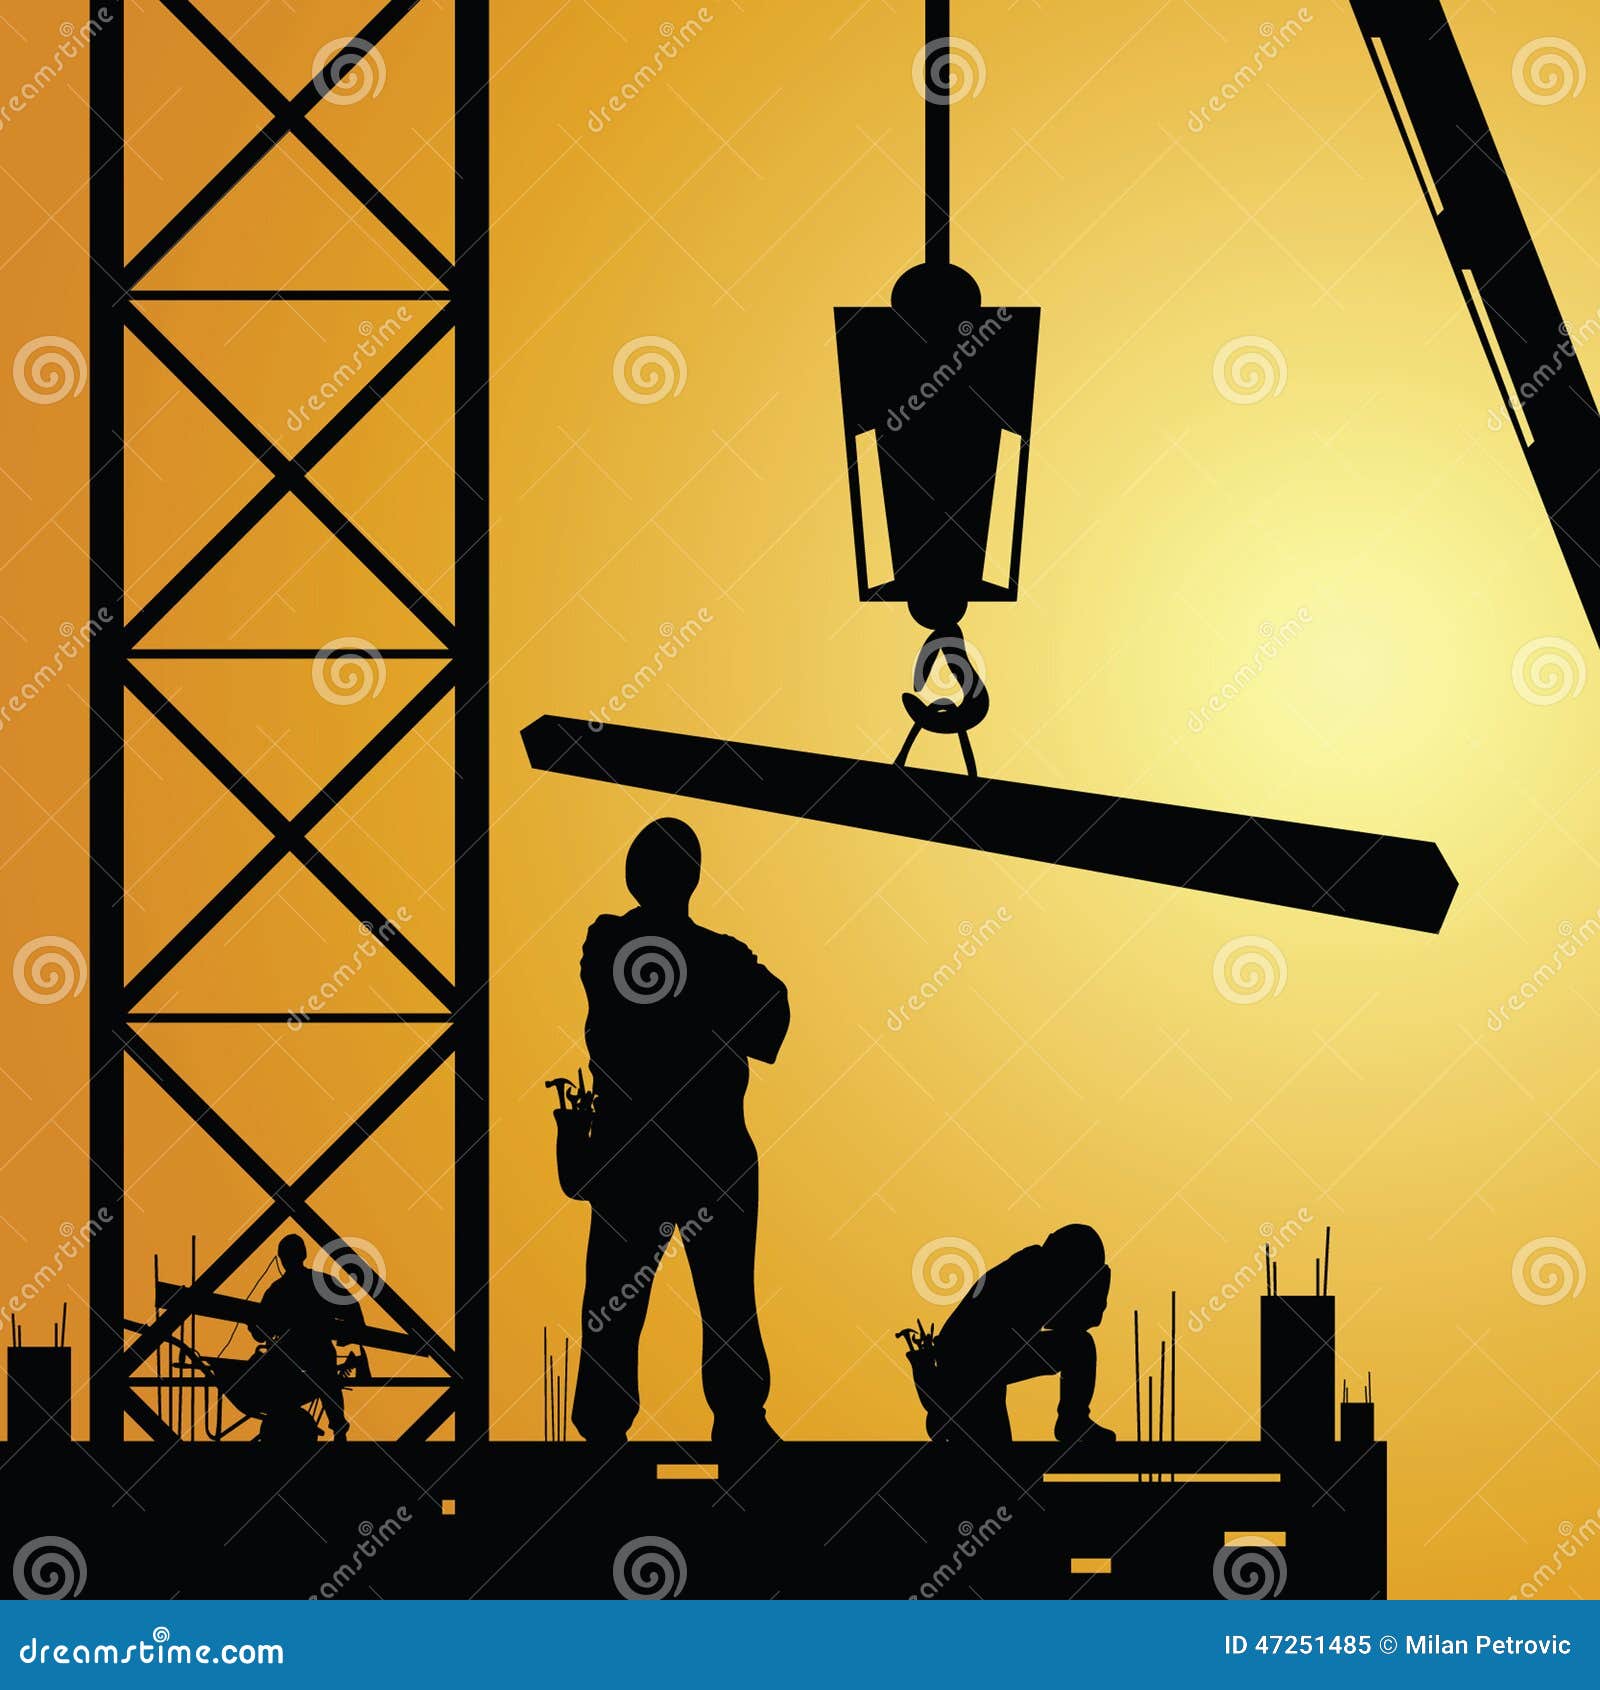 constuction worker at work with crane